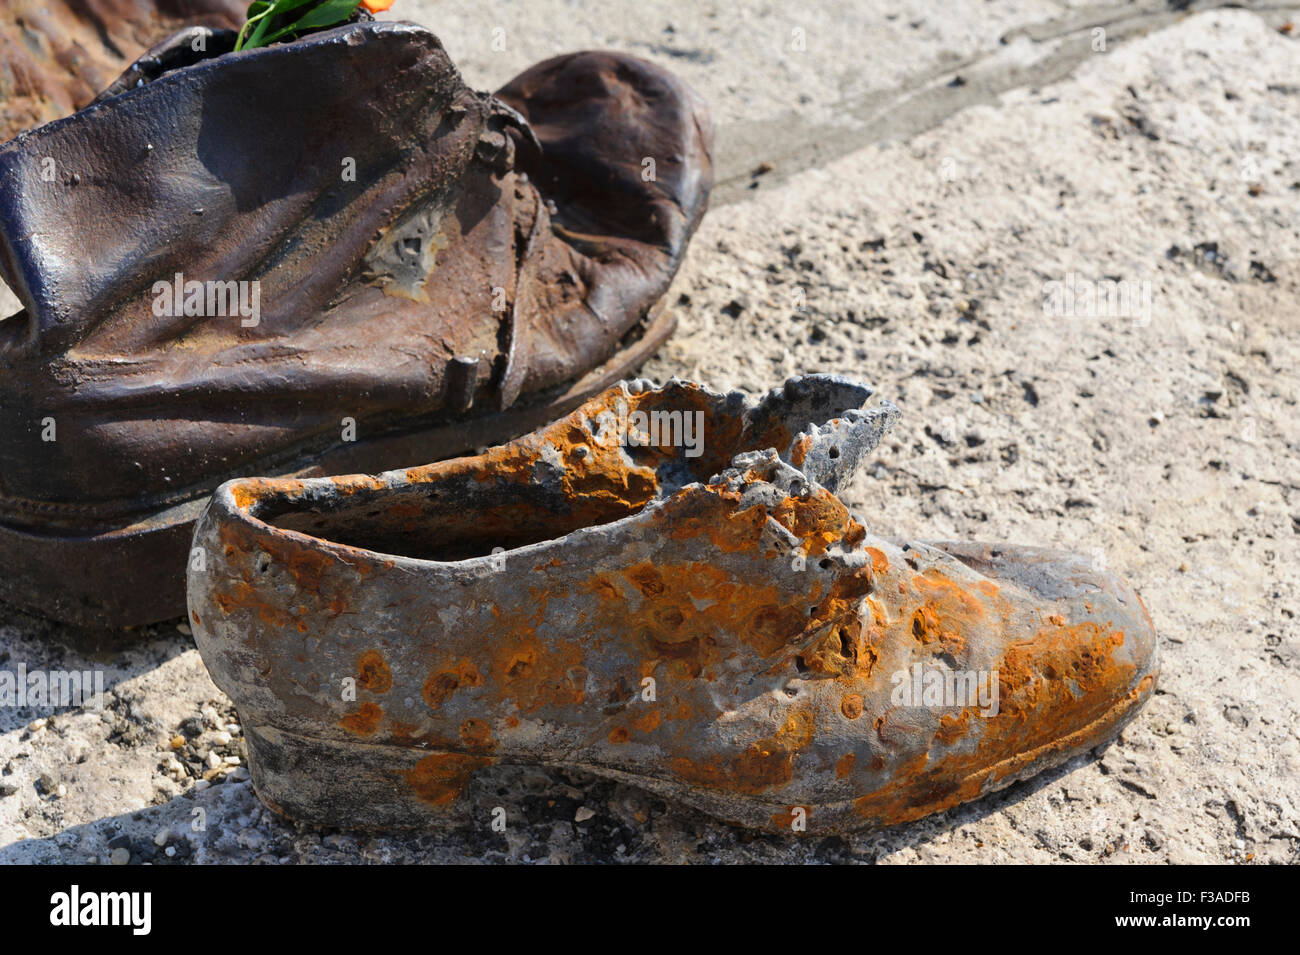 Iron shoes memorial by the river Danube to Jewish people executed in World War 2, Budapest, Hungary. Stock Photo